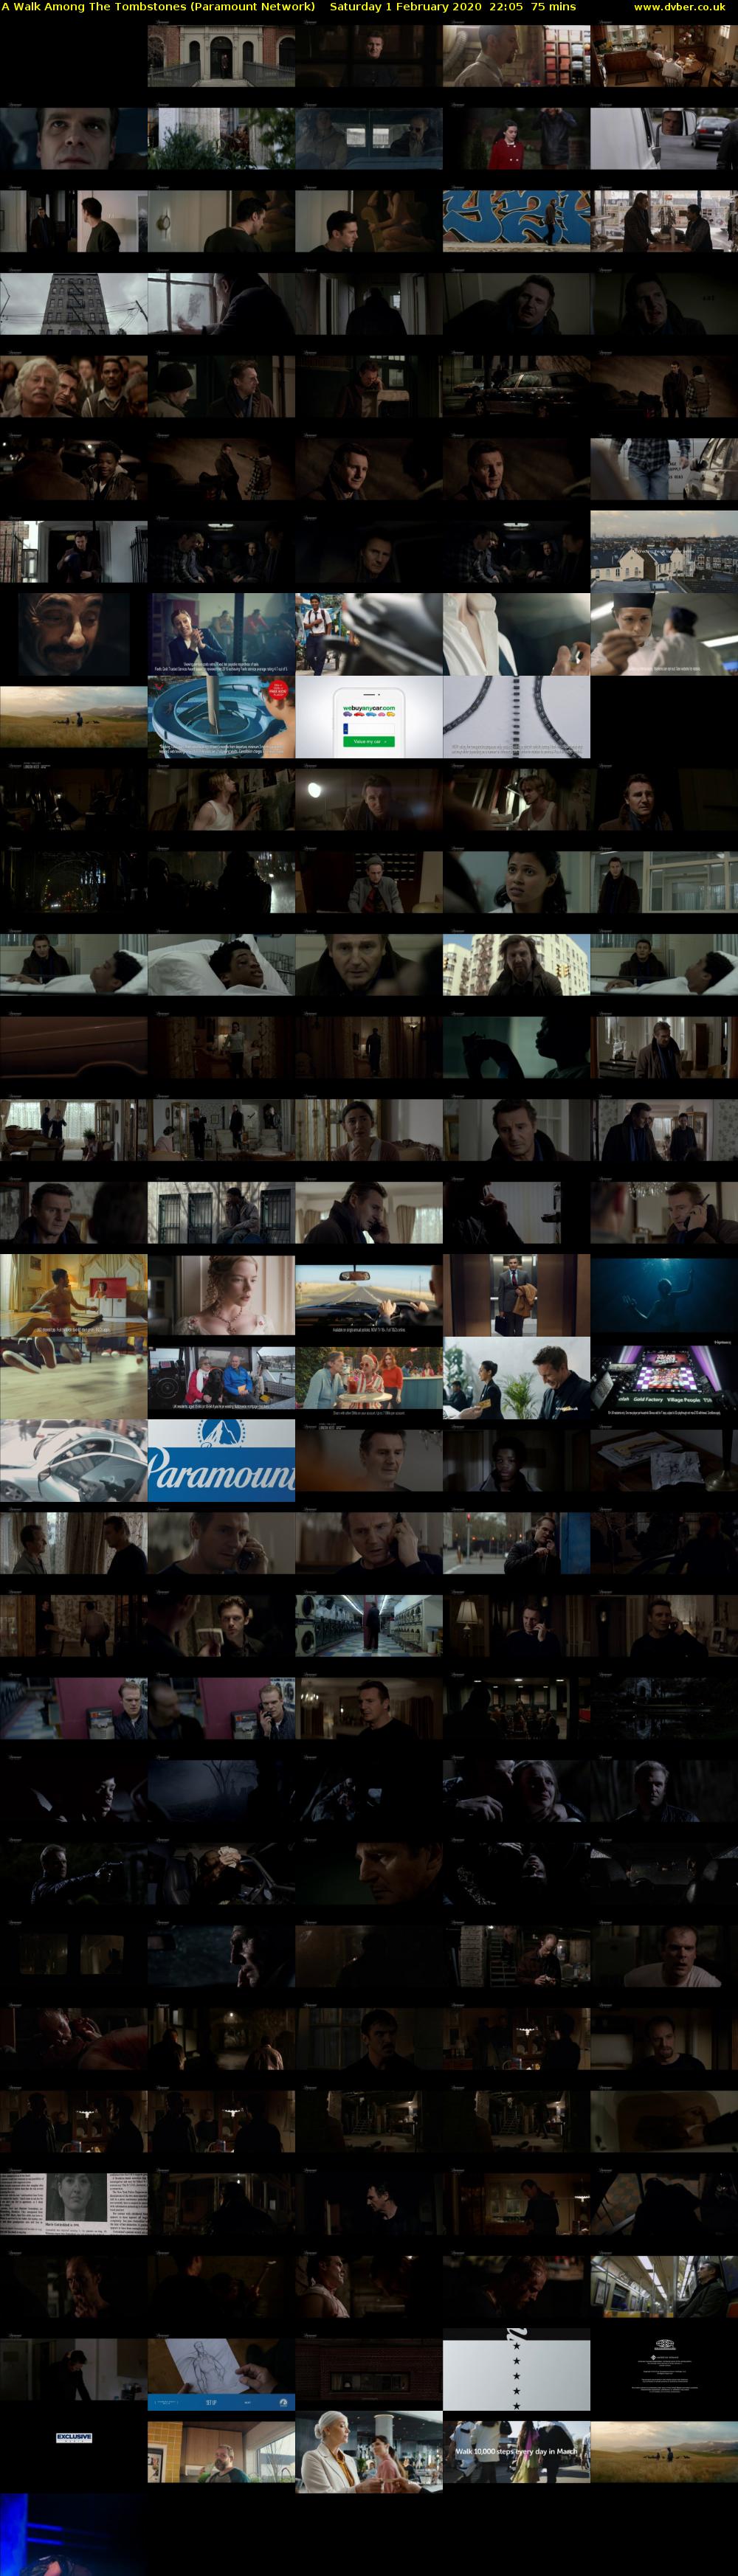 A Walk Among The Tombstones (Paramount Network) Saturday 1 February 2020 22:05 - 23:20